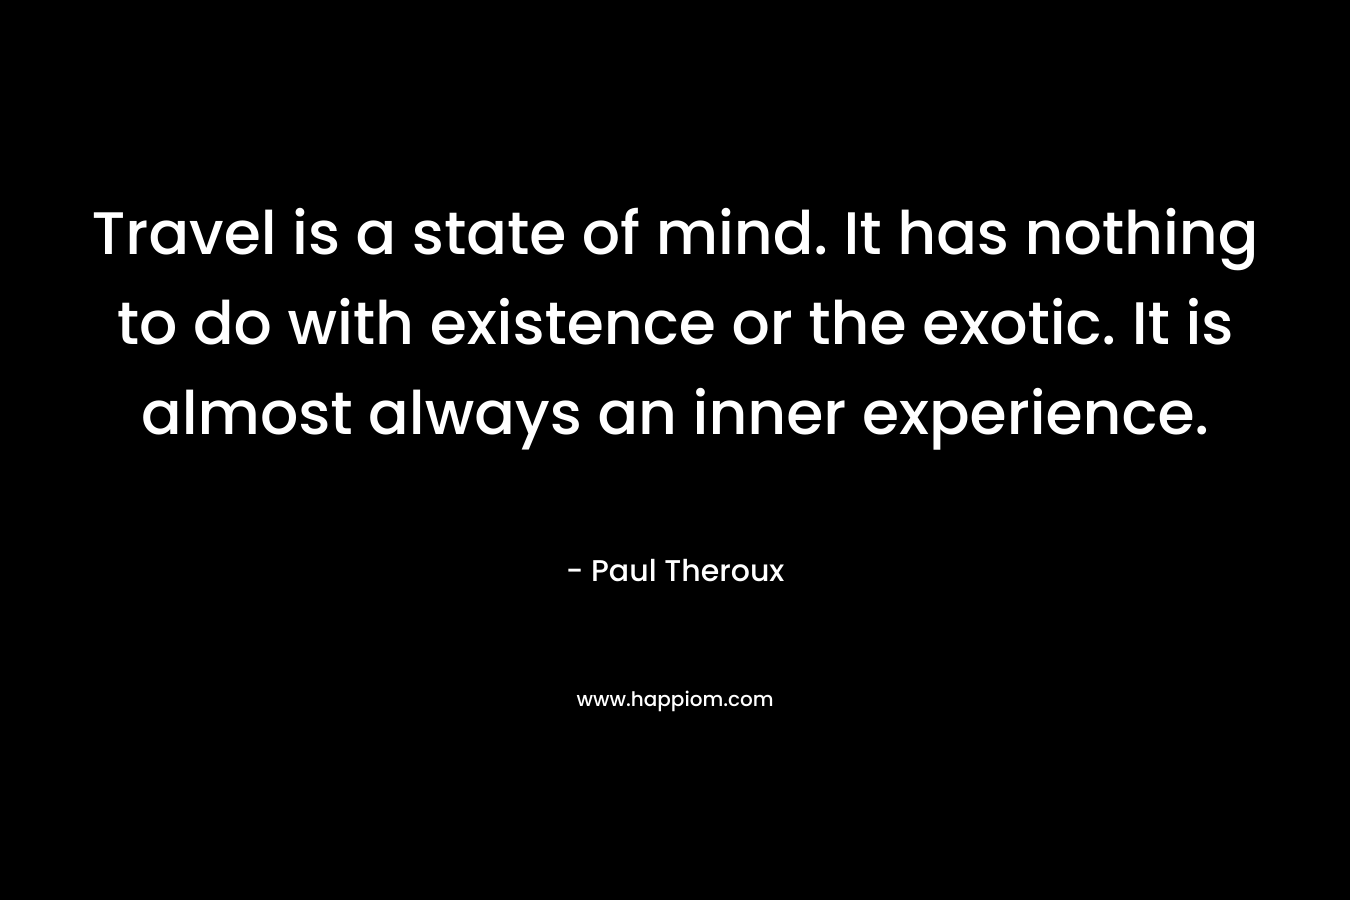 Travel is a state of mind. It has nothing to do with existence or the exotic. It is almost always an inner experience. – Paul Theroux